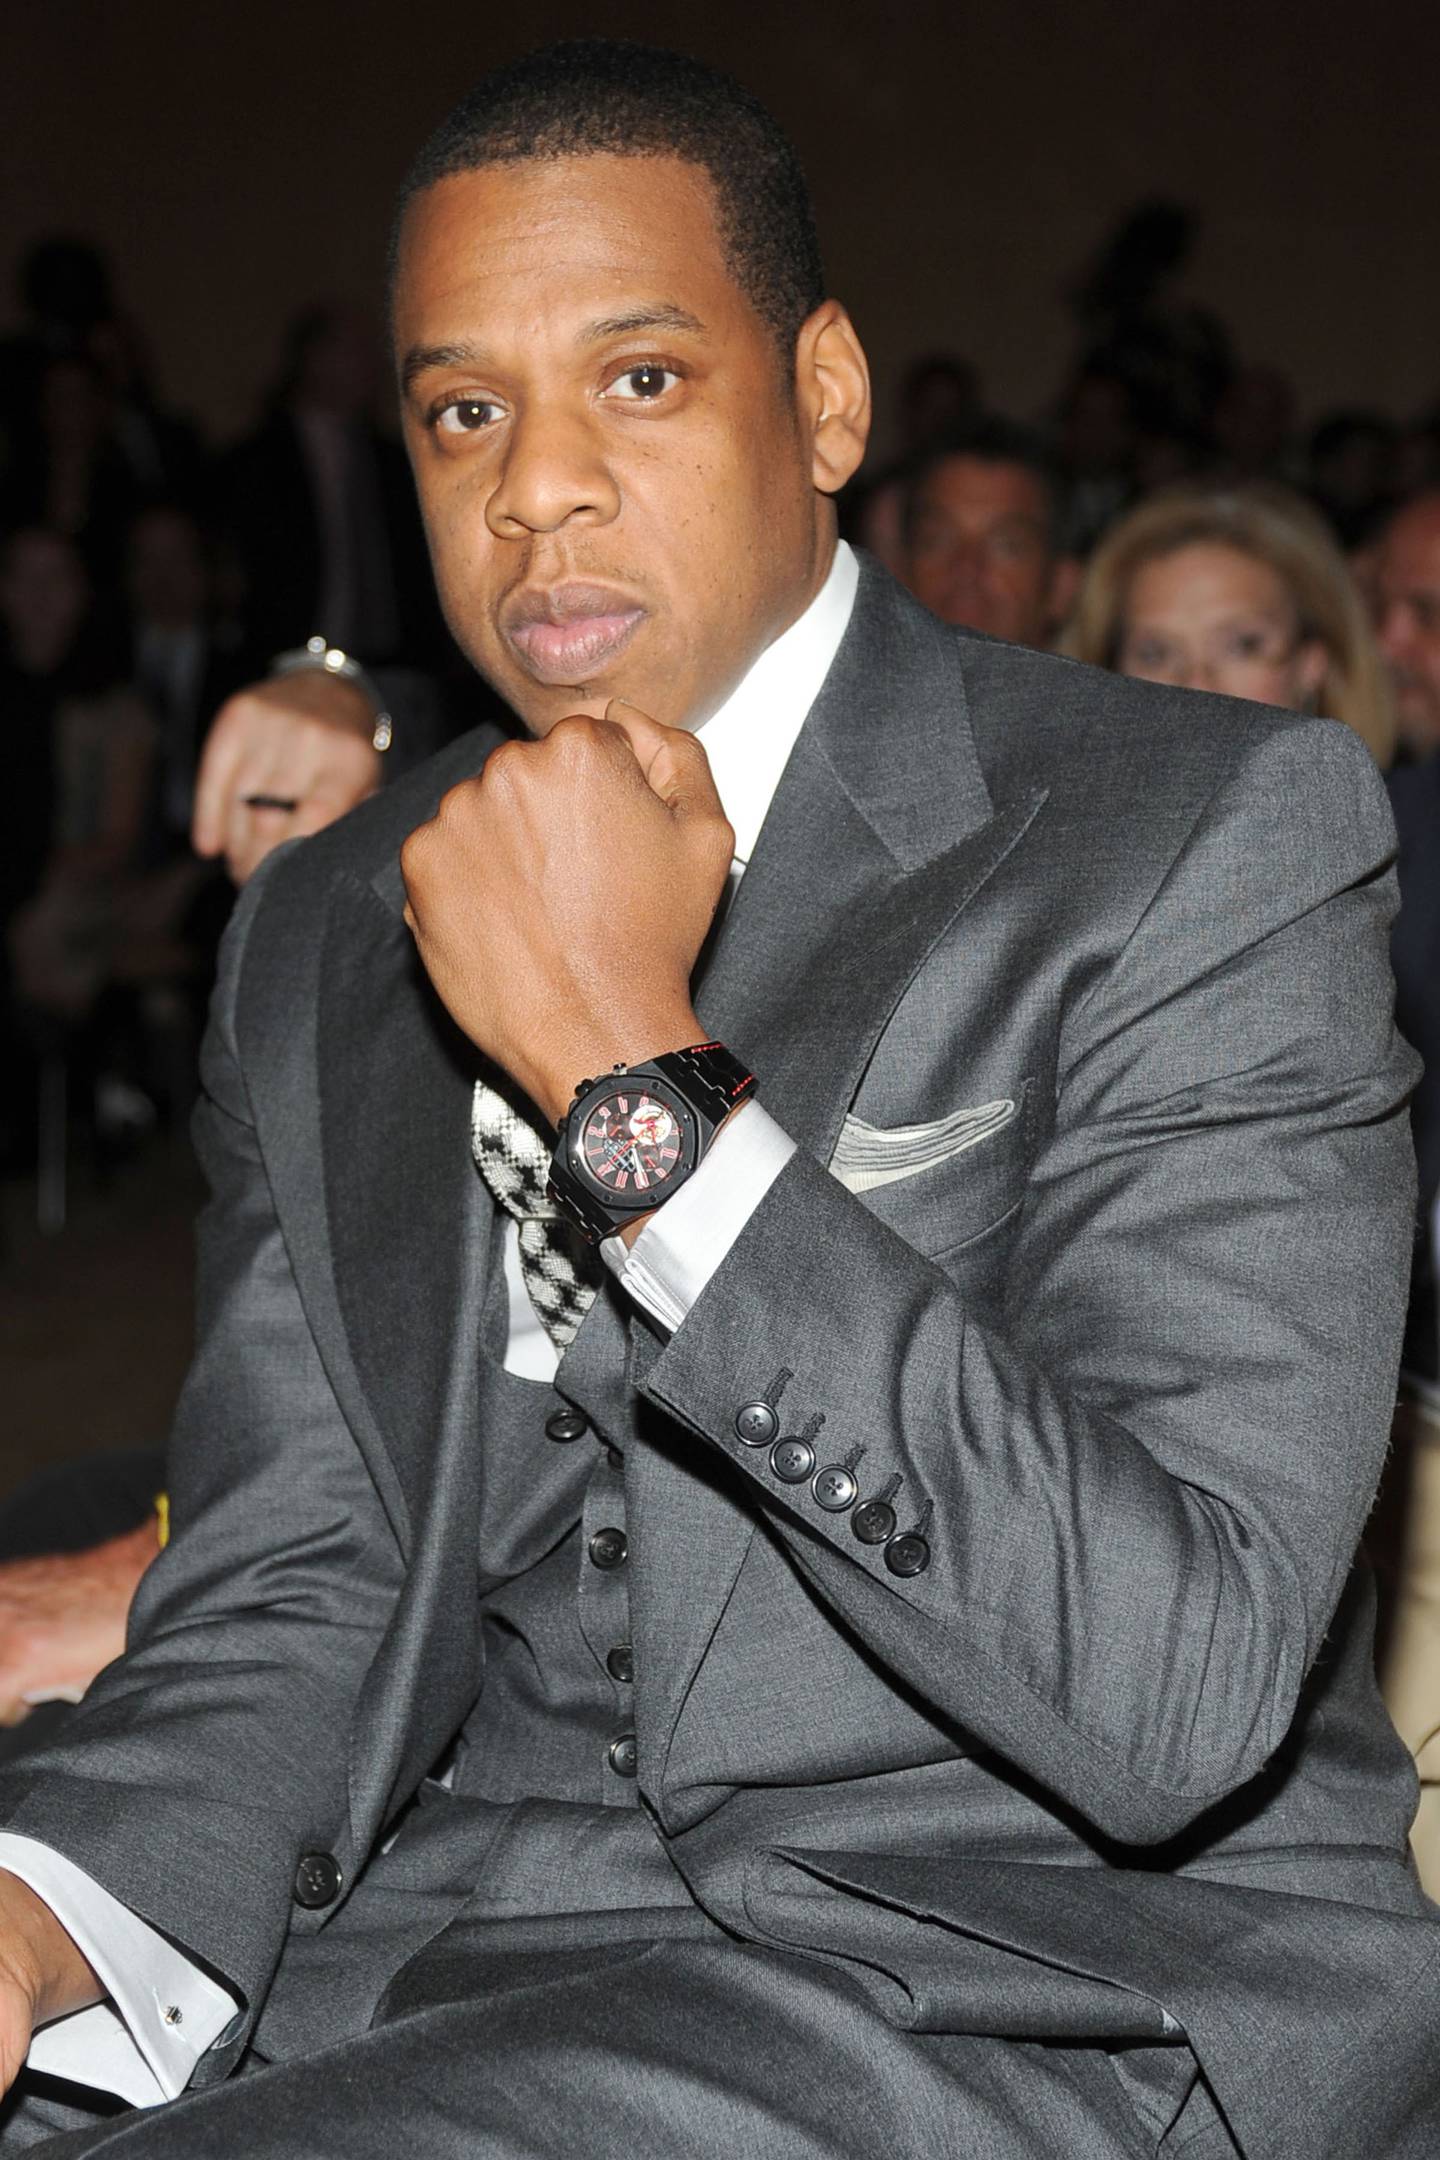 Jay-Z attends Audemars Piguet "Time To Give" celebrity watch auction to benefit Broadway Cares / Equity Fights AIDS.